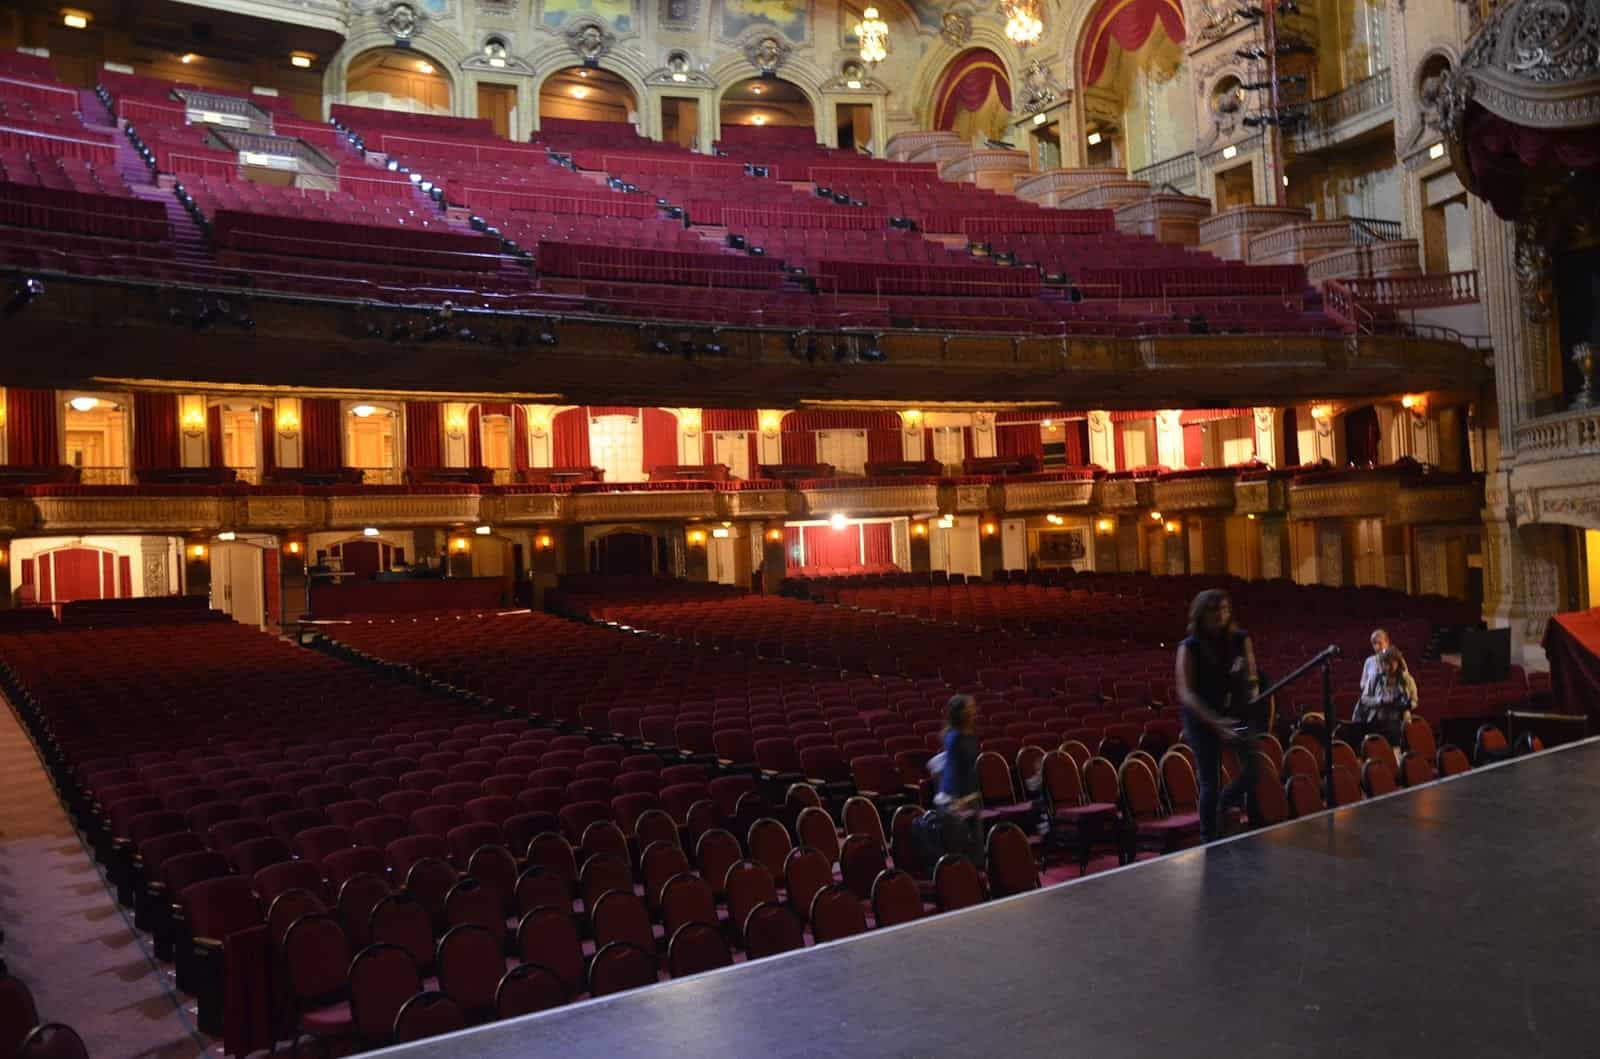 View from the stage at the Chicago Theatre on State Street